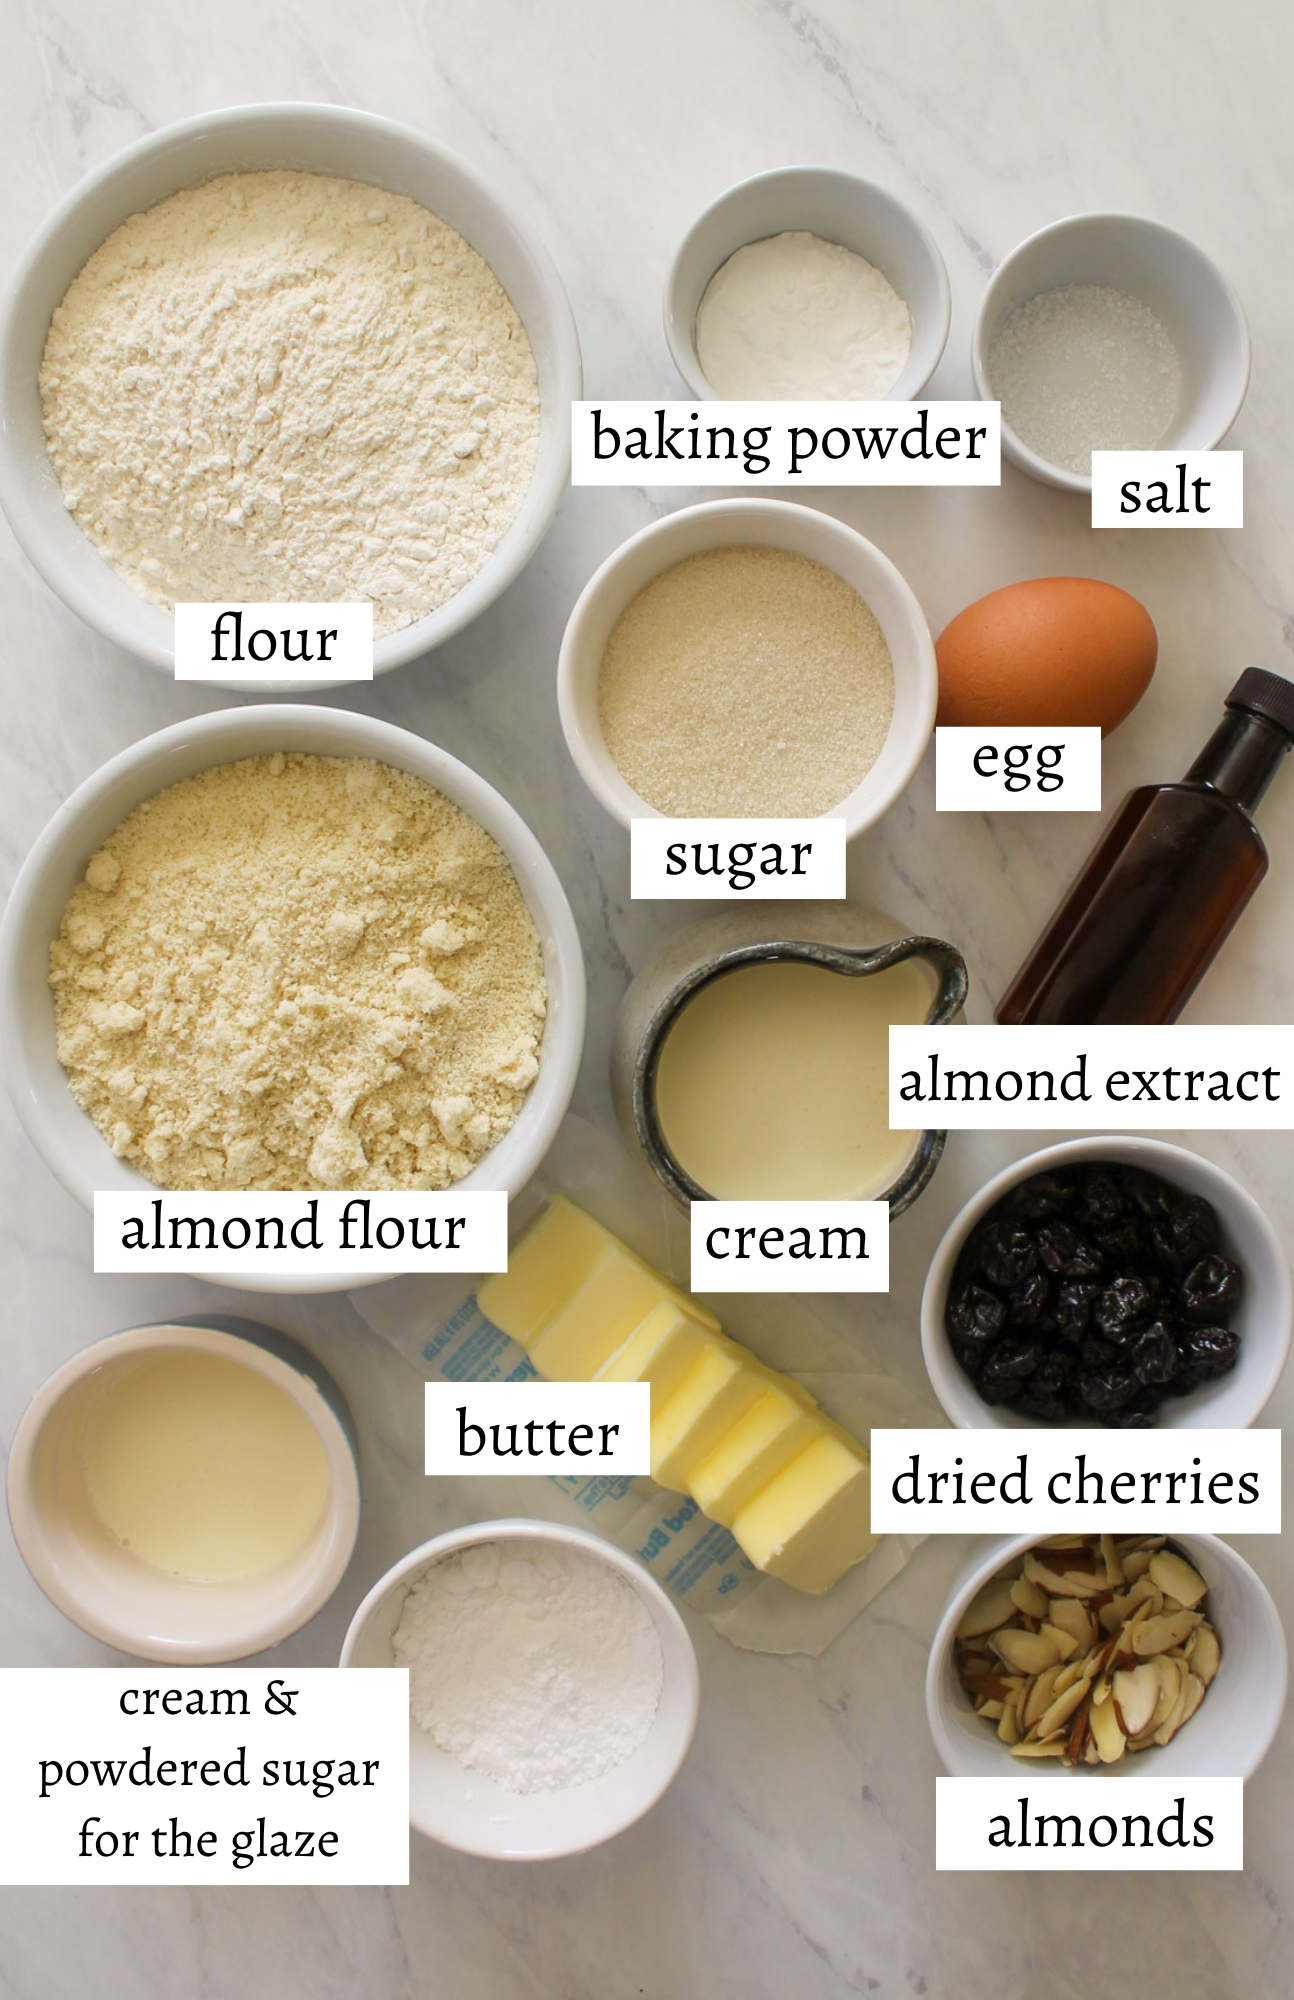 Labeled ingredients for Almond Cherry Scones.